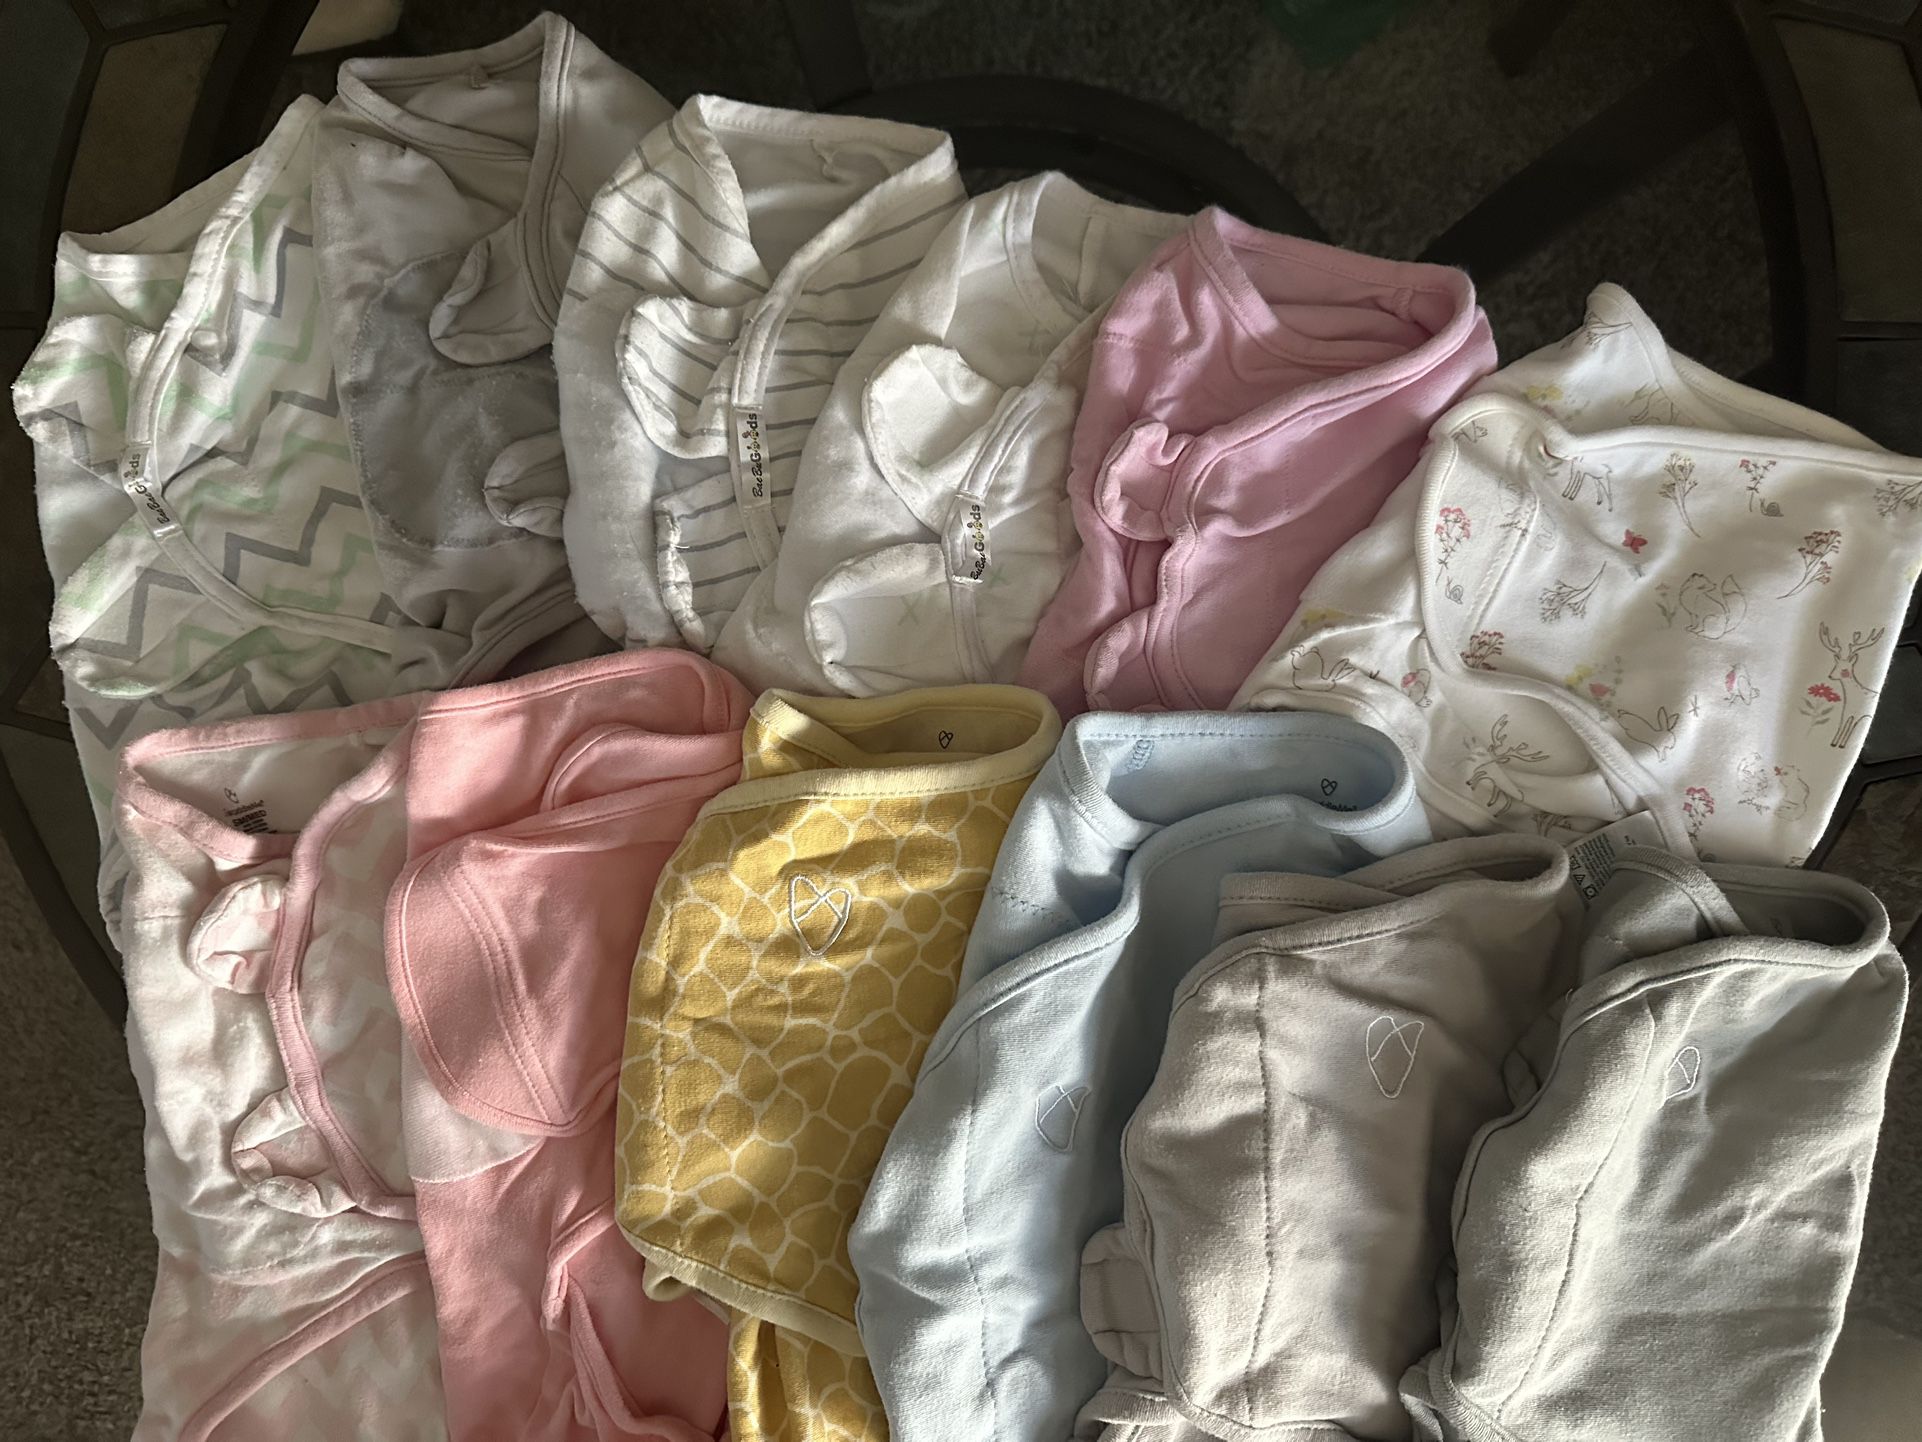 Baby Swaddles